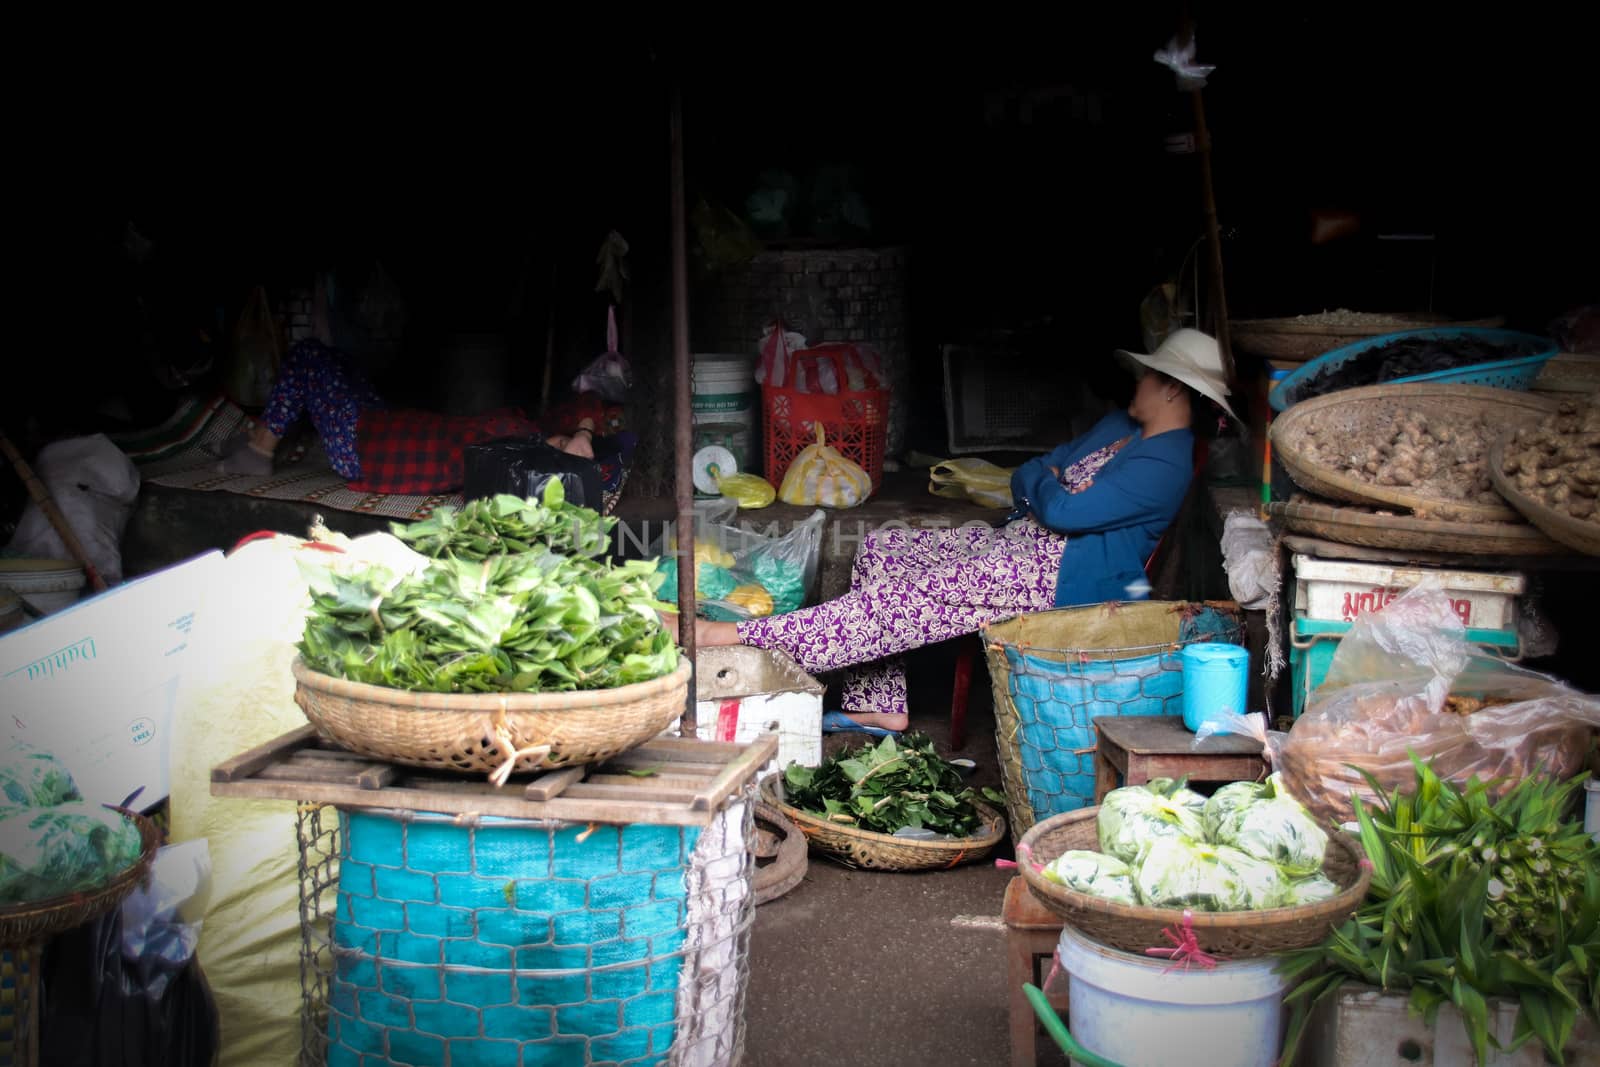 Editorial. A Khmer or Cambodian vegetable seller taking a nap in her market stall in the local market of Phnom Pehn, Cambodia